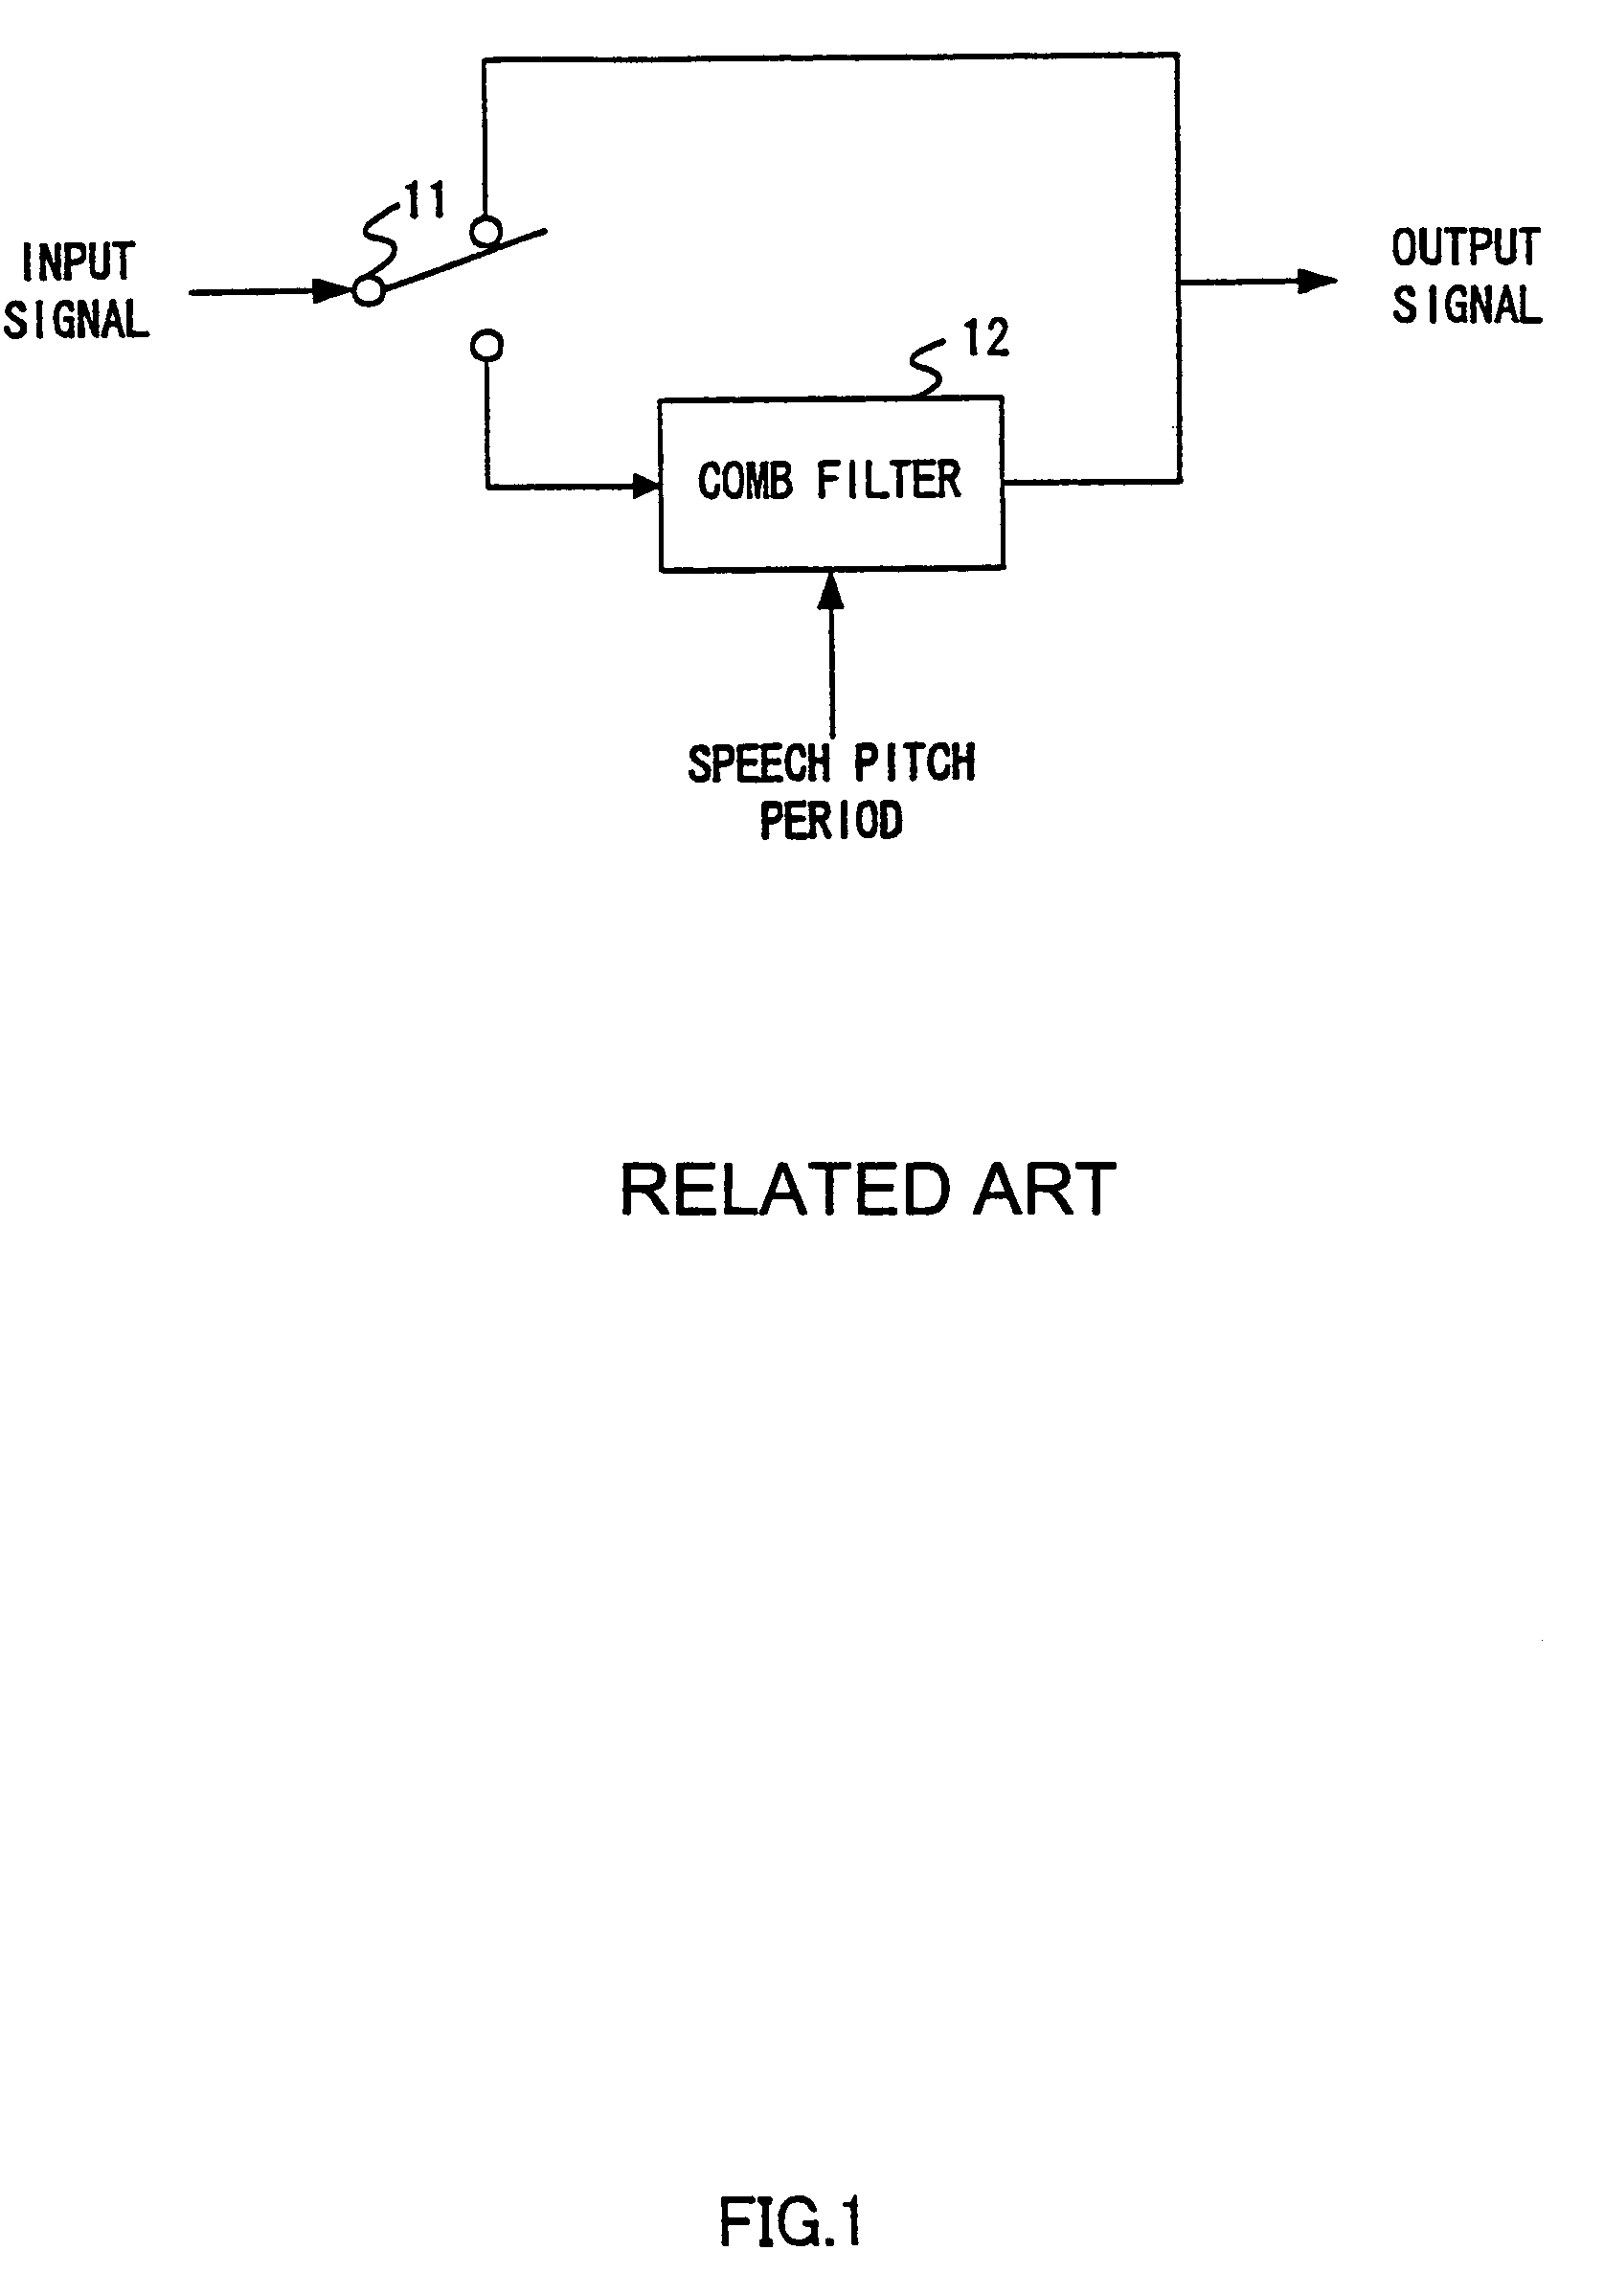 Speech processing apparatus and method for enhancing speech information and suppressing noise in spectral divisions of a speech signal